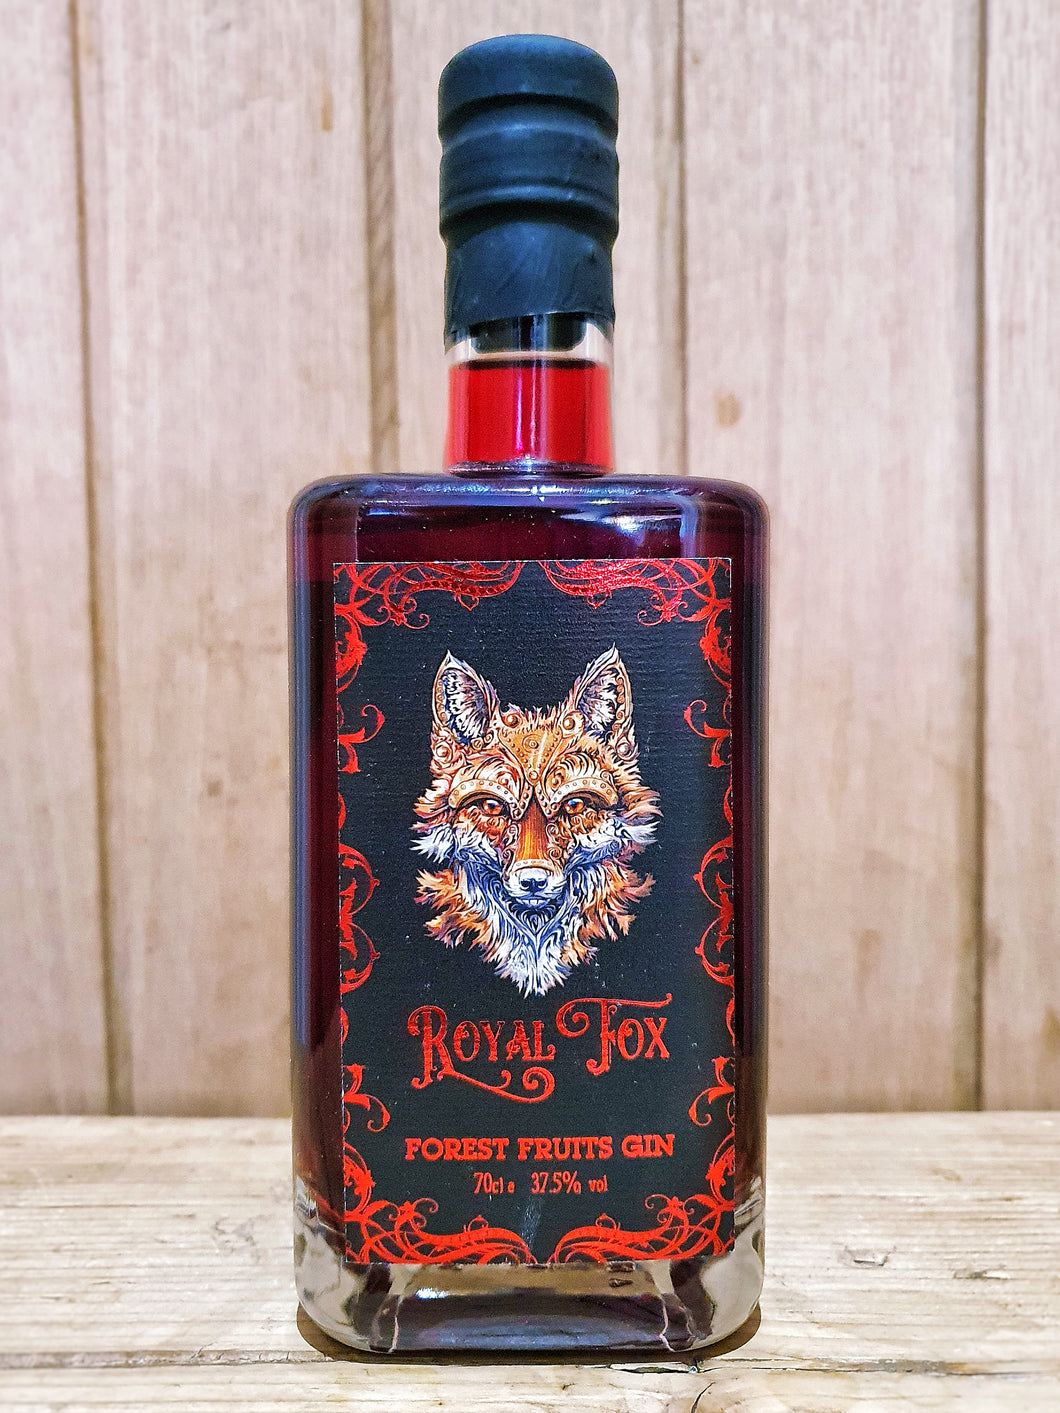 Royal Fox - Forest Fruits Gin